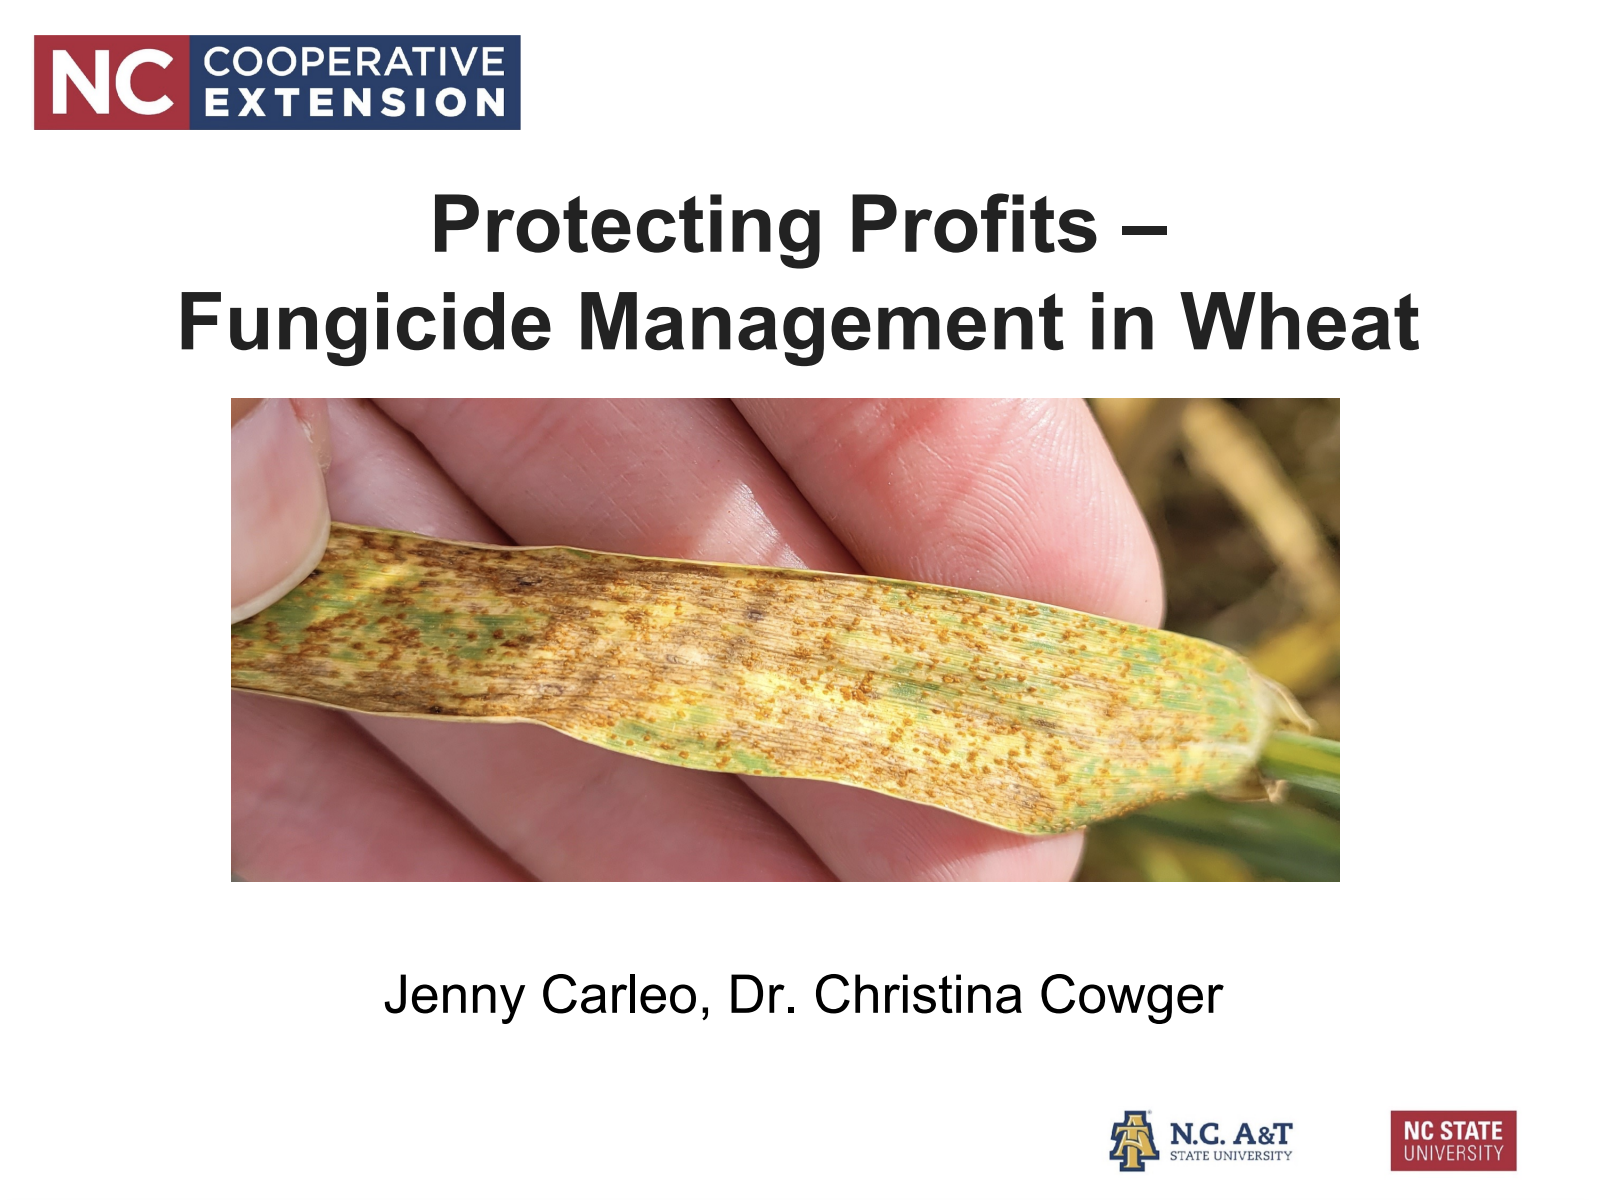 Protecting Profits - Fungicide Management in Wheat